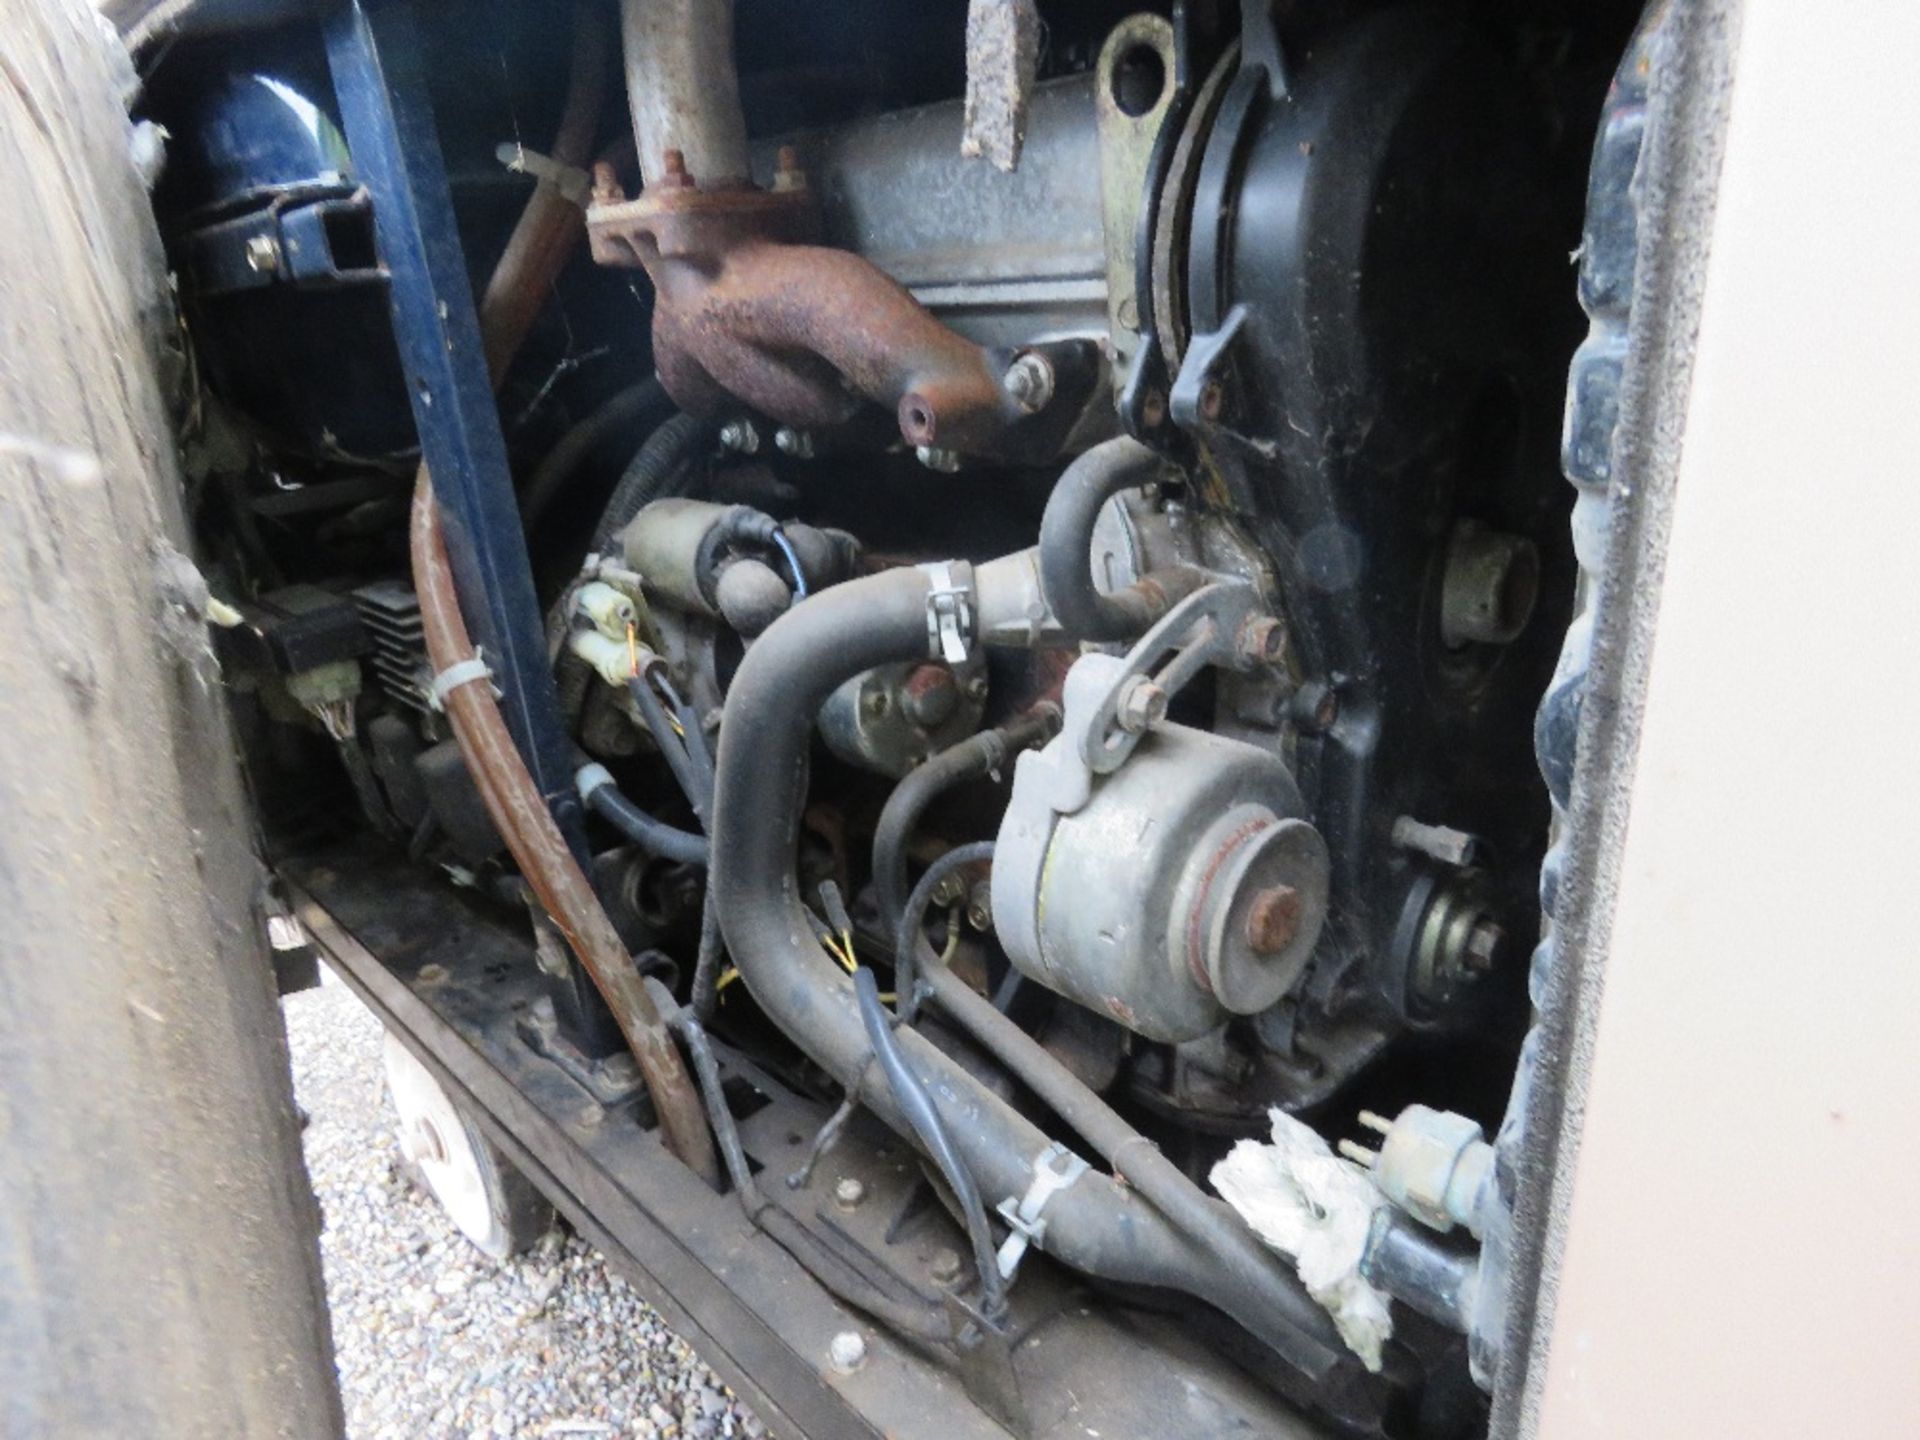 HONDA EX10D WHEELED 10KVA GENERATOR. SPARES/REPAIR AS APPEARS INCOMPLETE, SEE IMAGES. - Image 2 of 5